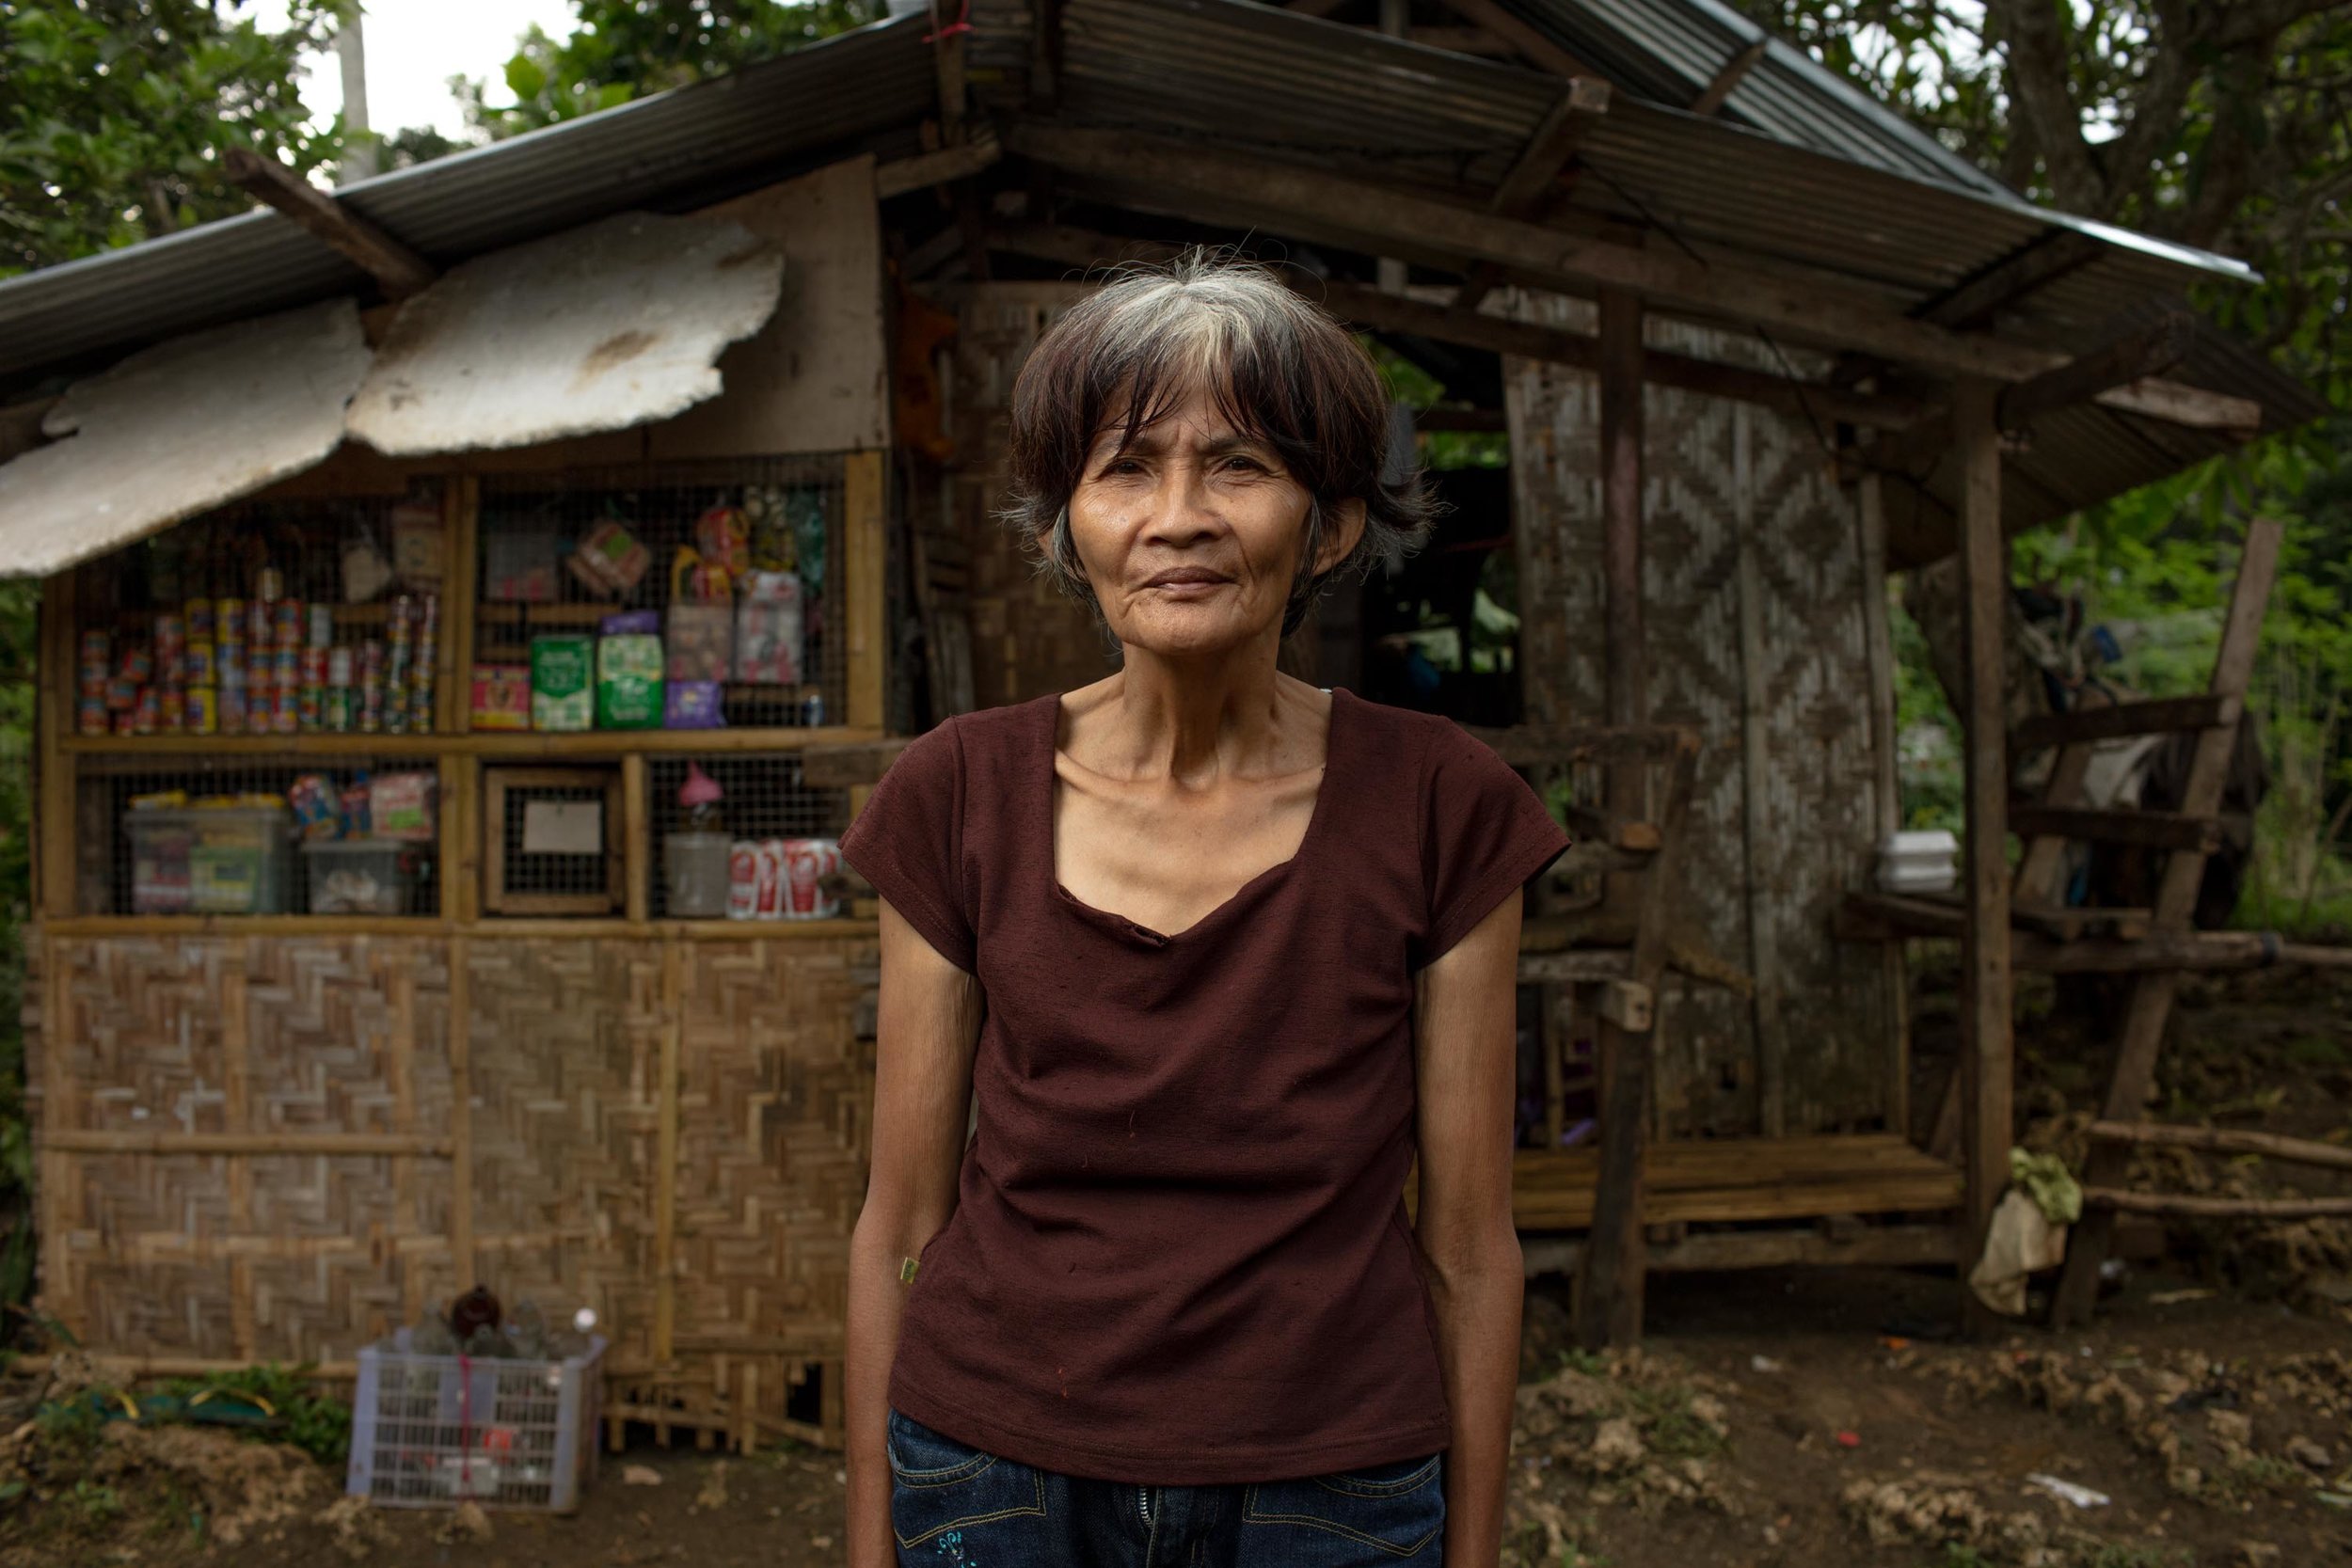  My name is Nieves and I am 62 years old. I collect Kangkong (leafy vegetables) and sell them on the sidewalk, so that I can buy rice to eat. Before that I sold pineapples. Due to poverty, I wasn’t able to send my children to school. One of my marrie